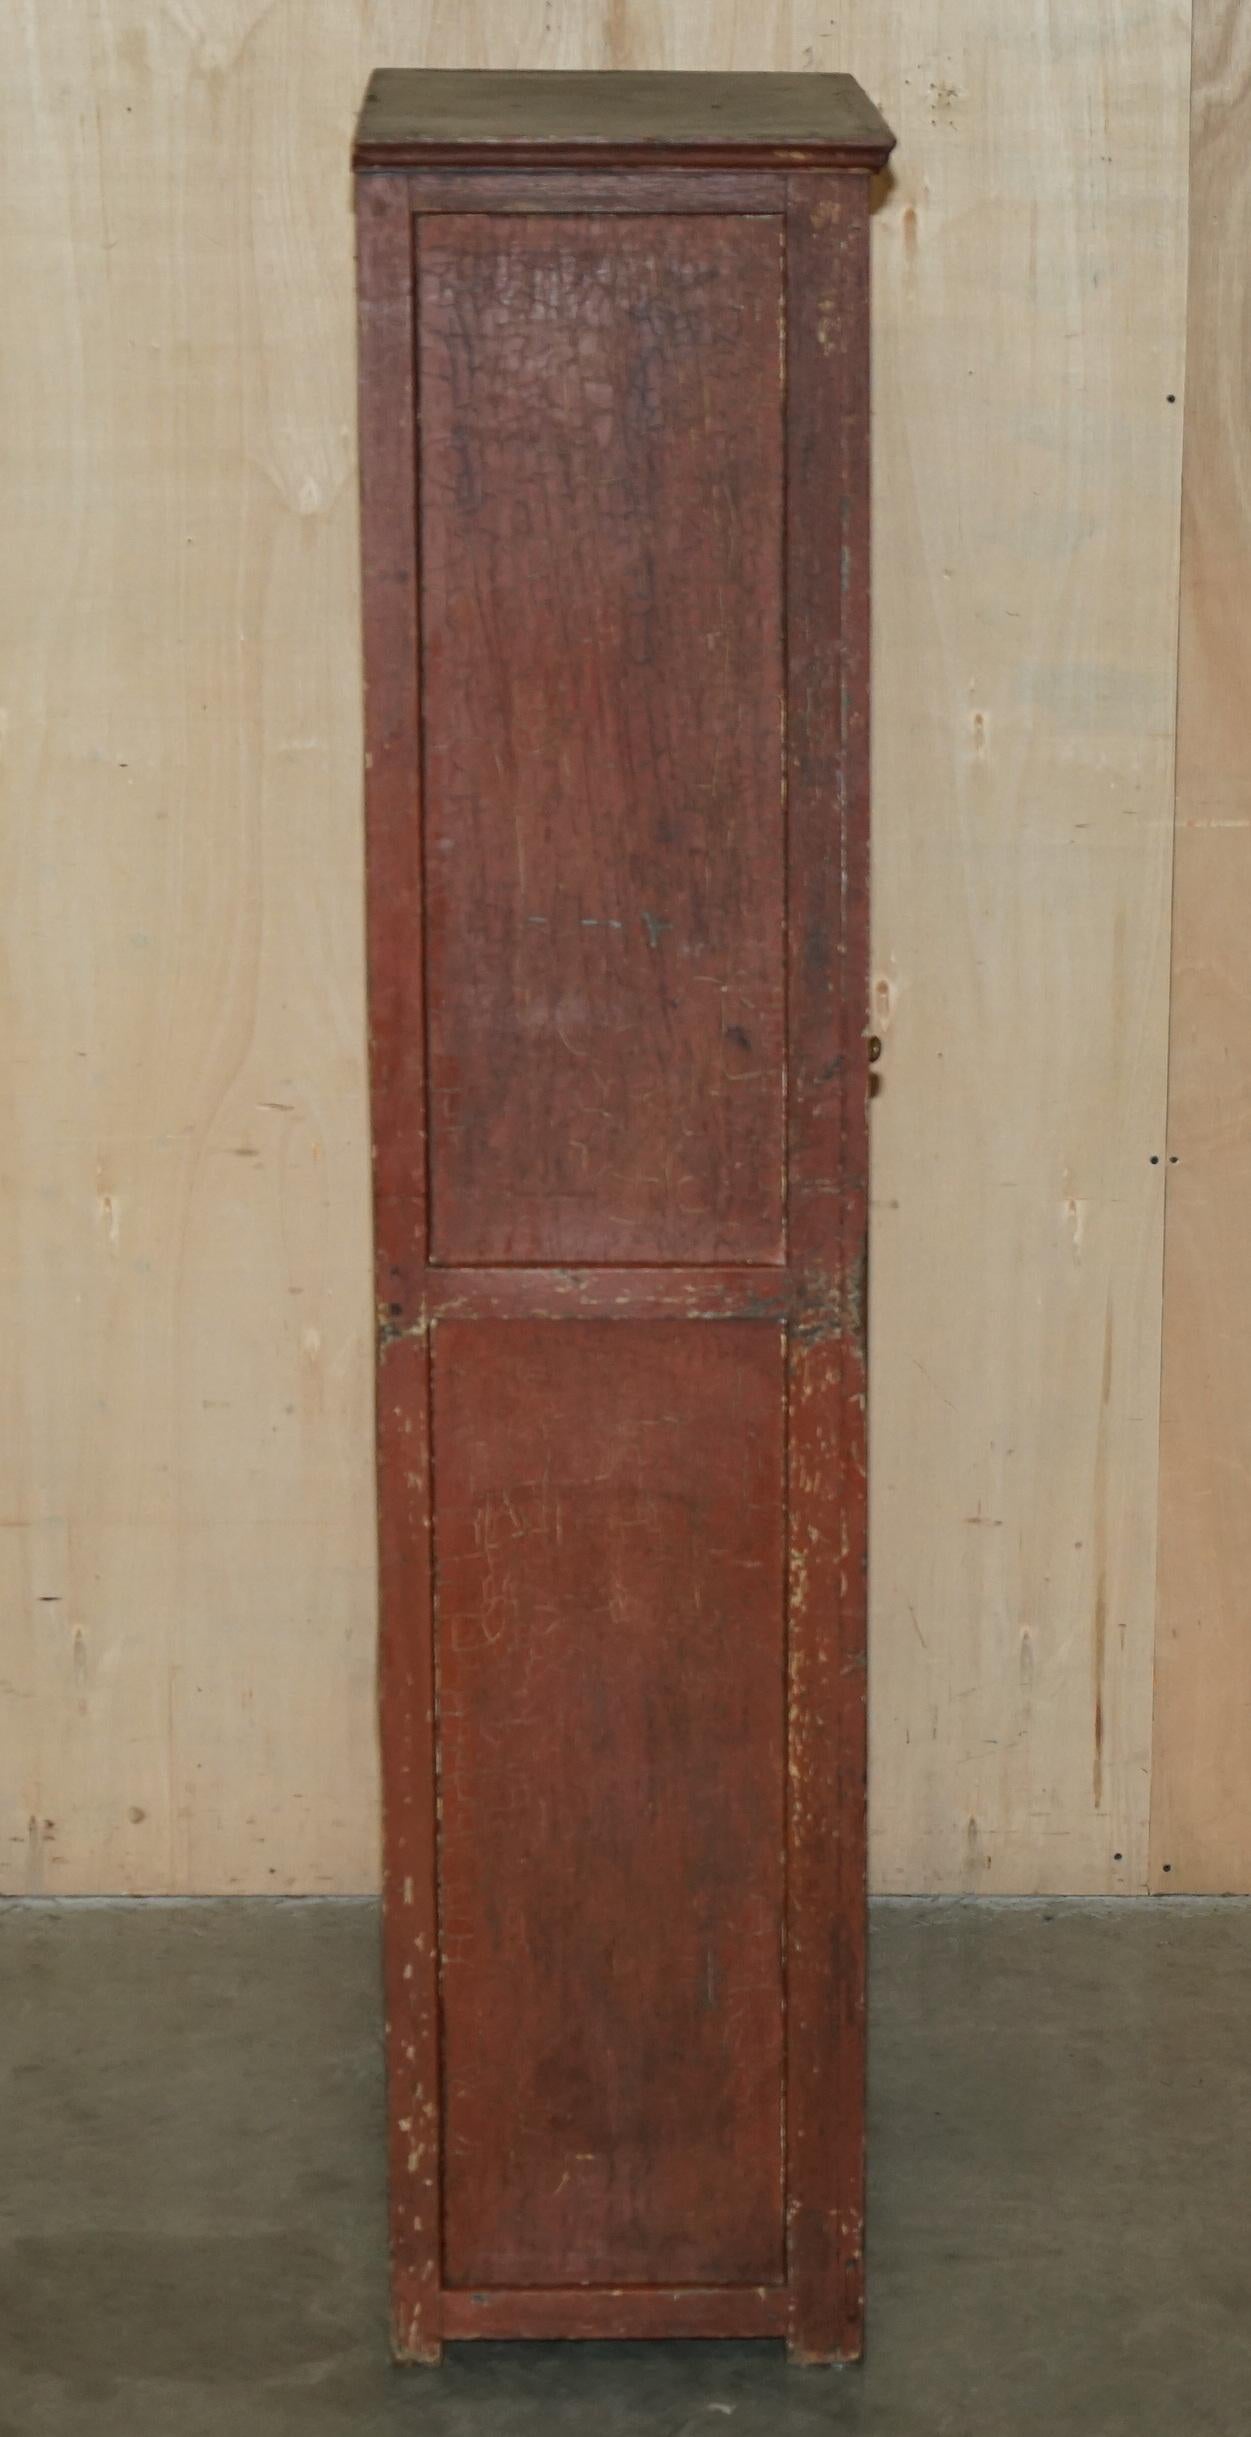 Hand-Painted ANTIQUE VICTORIAN ORIGINAL PAINT CIRCA 1880-1900 TOOL SHED CUPBOARD IN PiNE For Sale